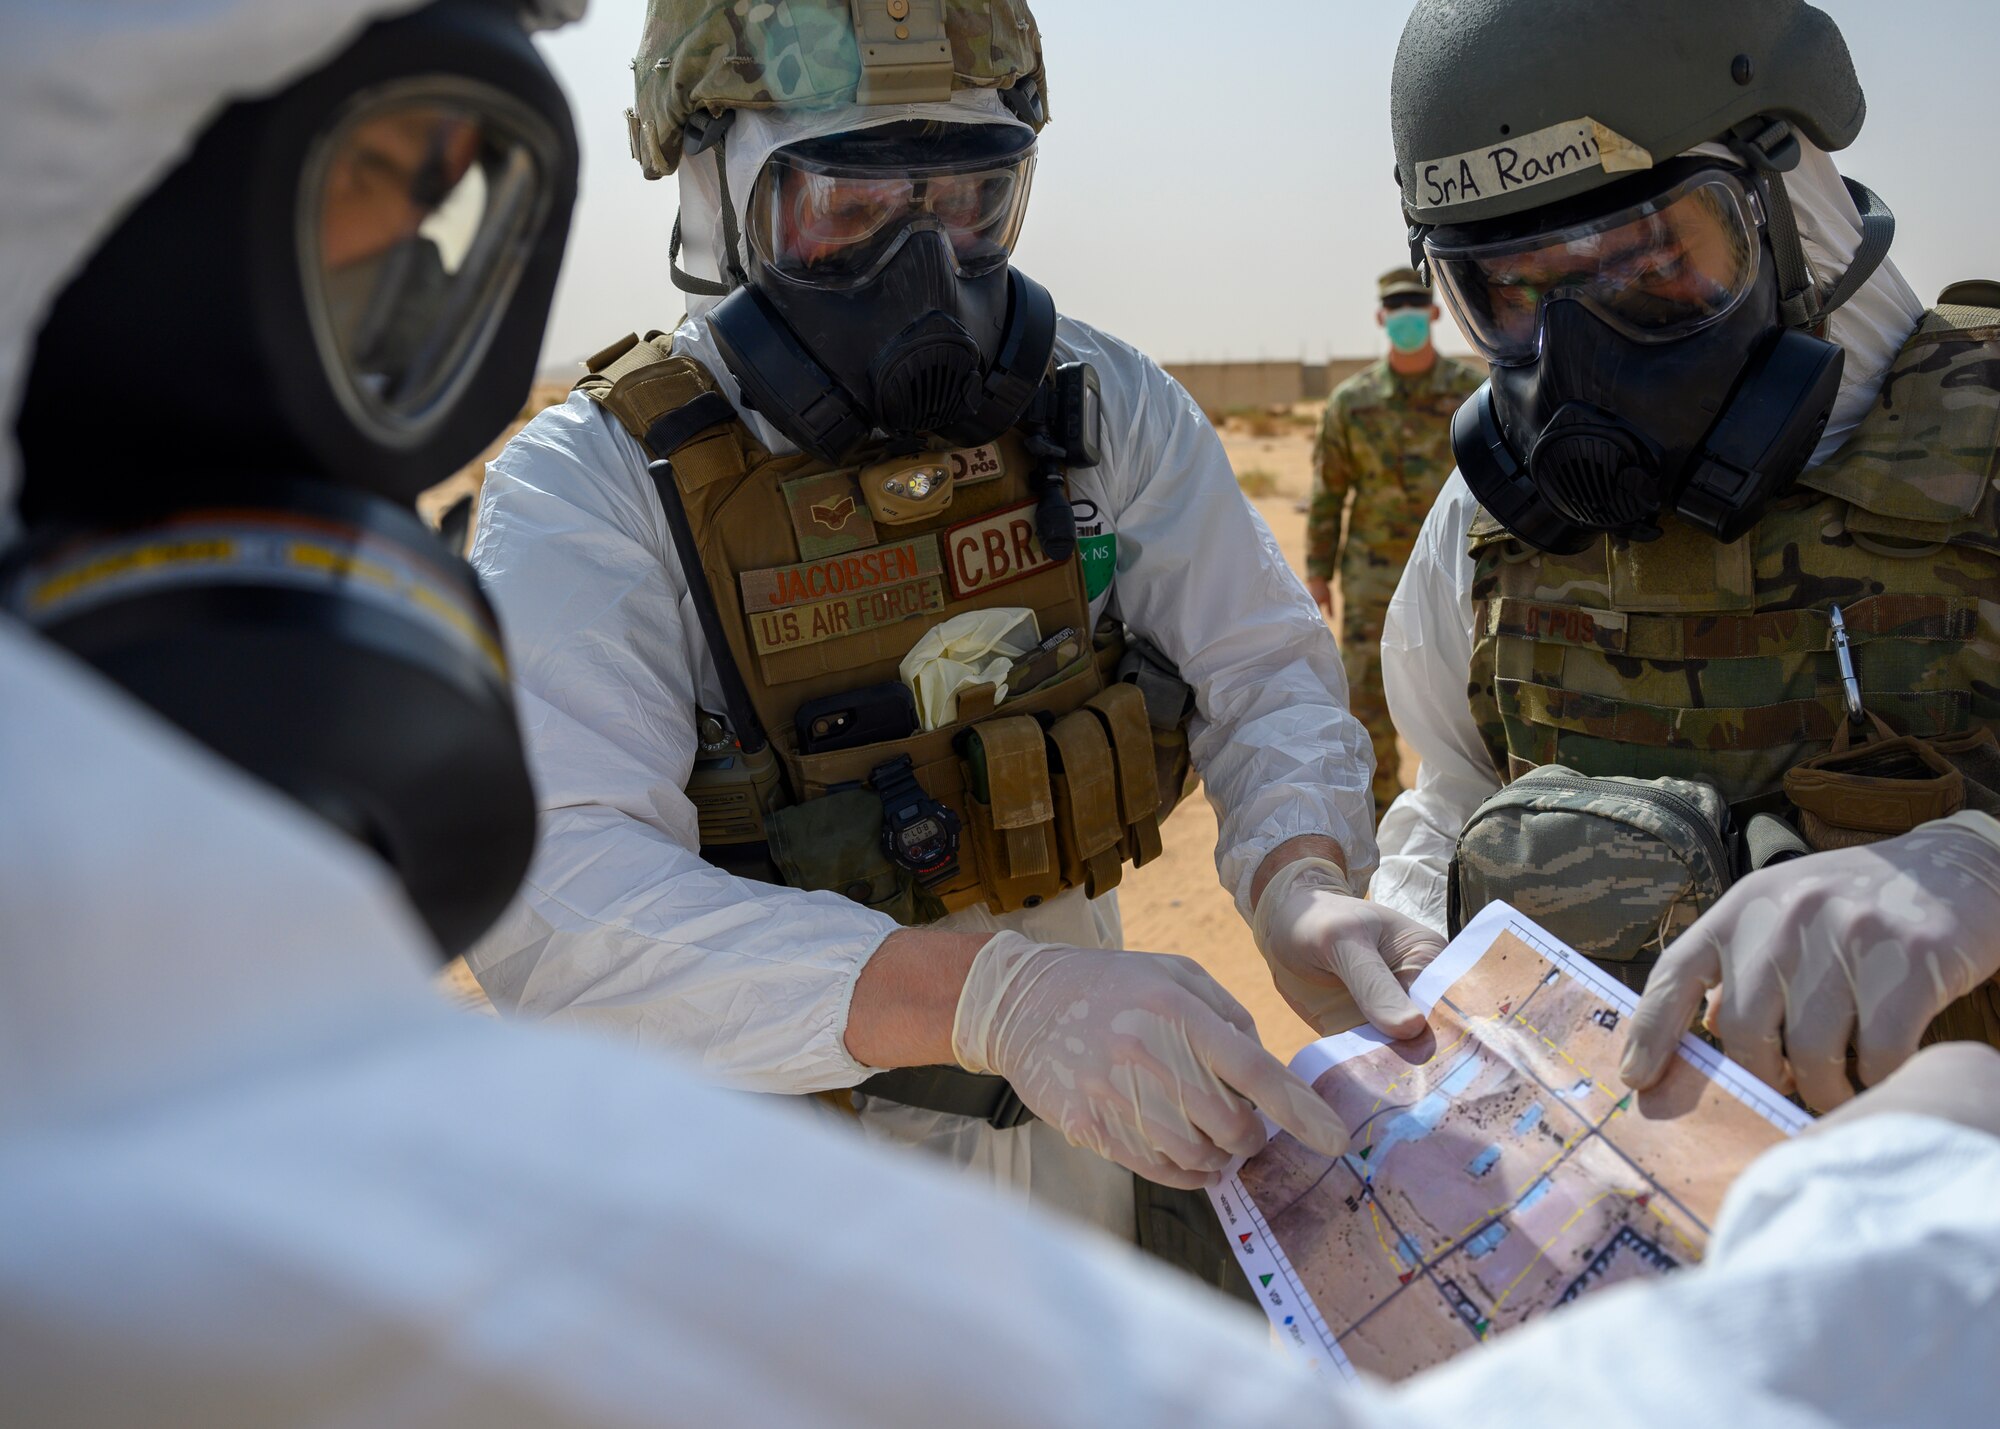 Members of the 378th Civil Engineer Squadron emergency management flight and members of the Royal Saudi Air Force discuss routes for a chemical, biological, radiological and nuclear response exercise, Prince Sultan Air Base, Kingdom of Saudi Arabia, May 26, 2021. The combined exercise demonstrates the emergency management integration between USAF and RSAF CBRN response units while also familiarizing each unit with the other’s techniques and procedures. (U.S. Air Force photo by Senior Airman Samuel Earick)